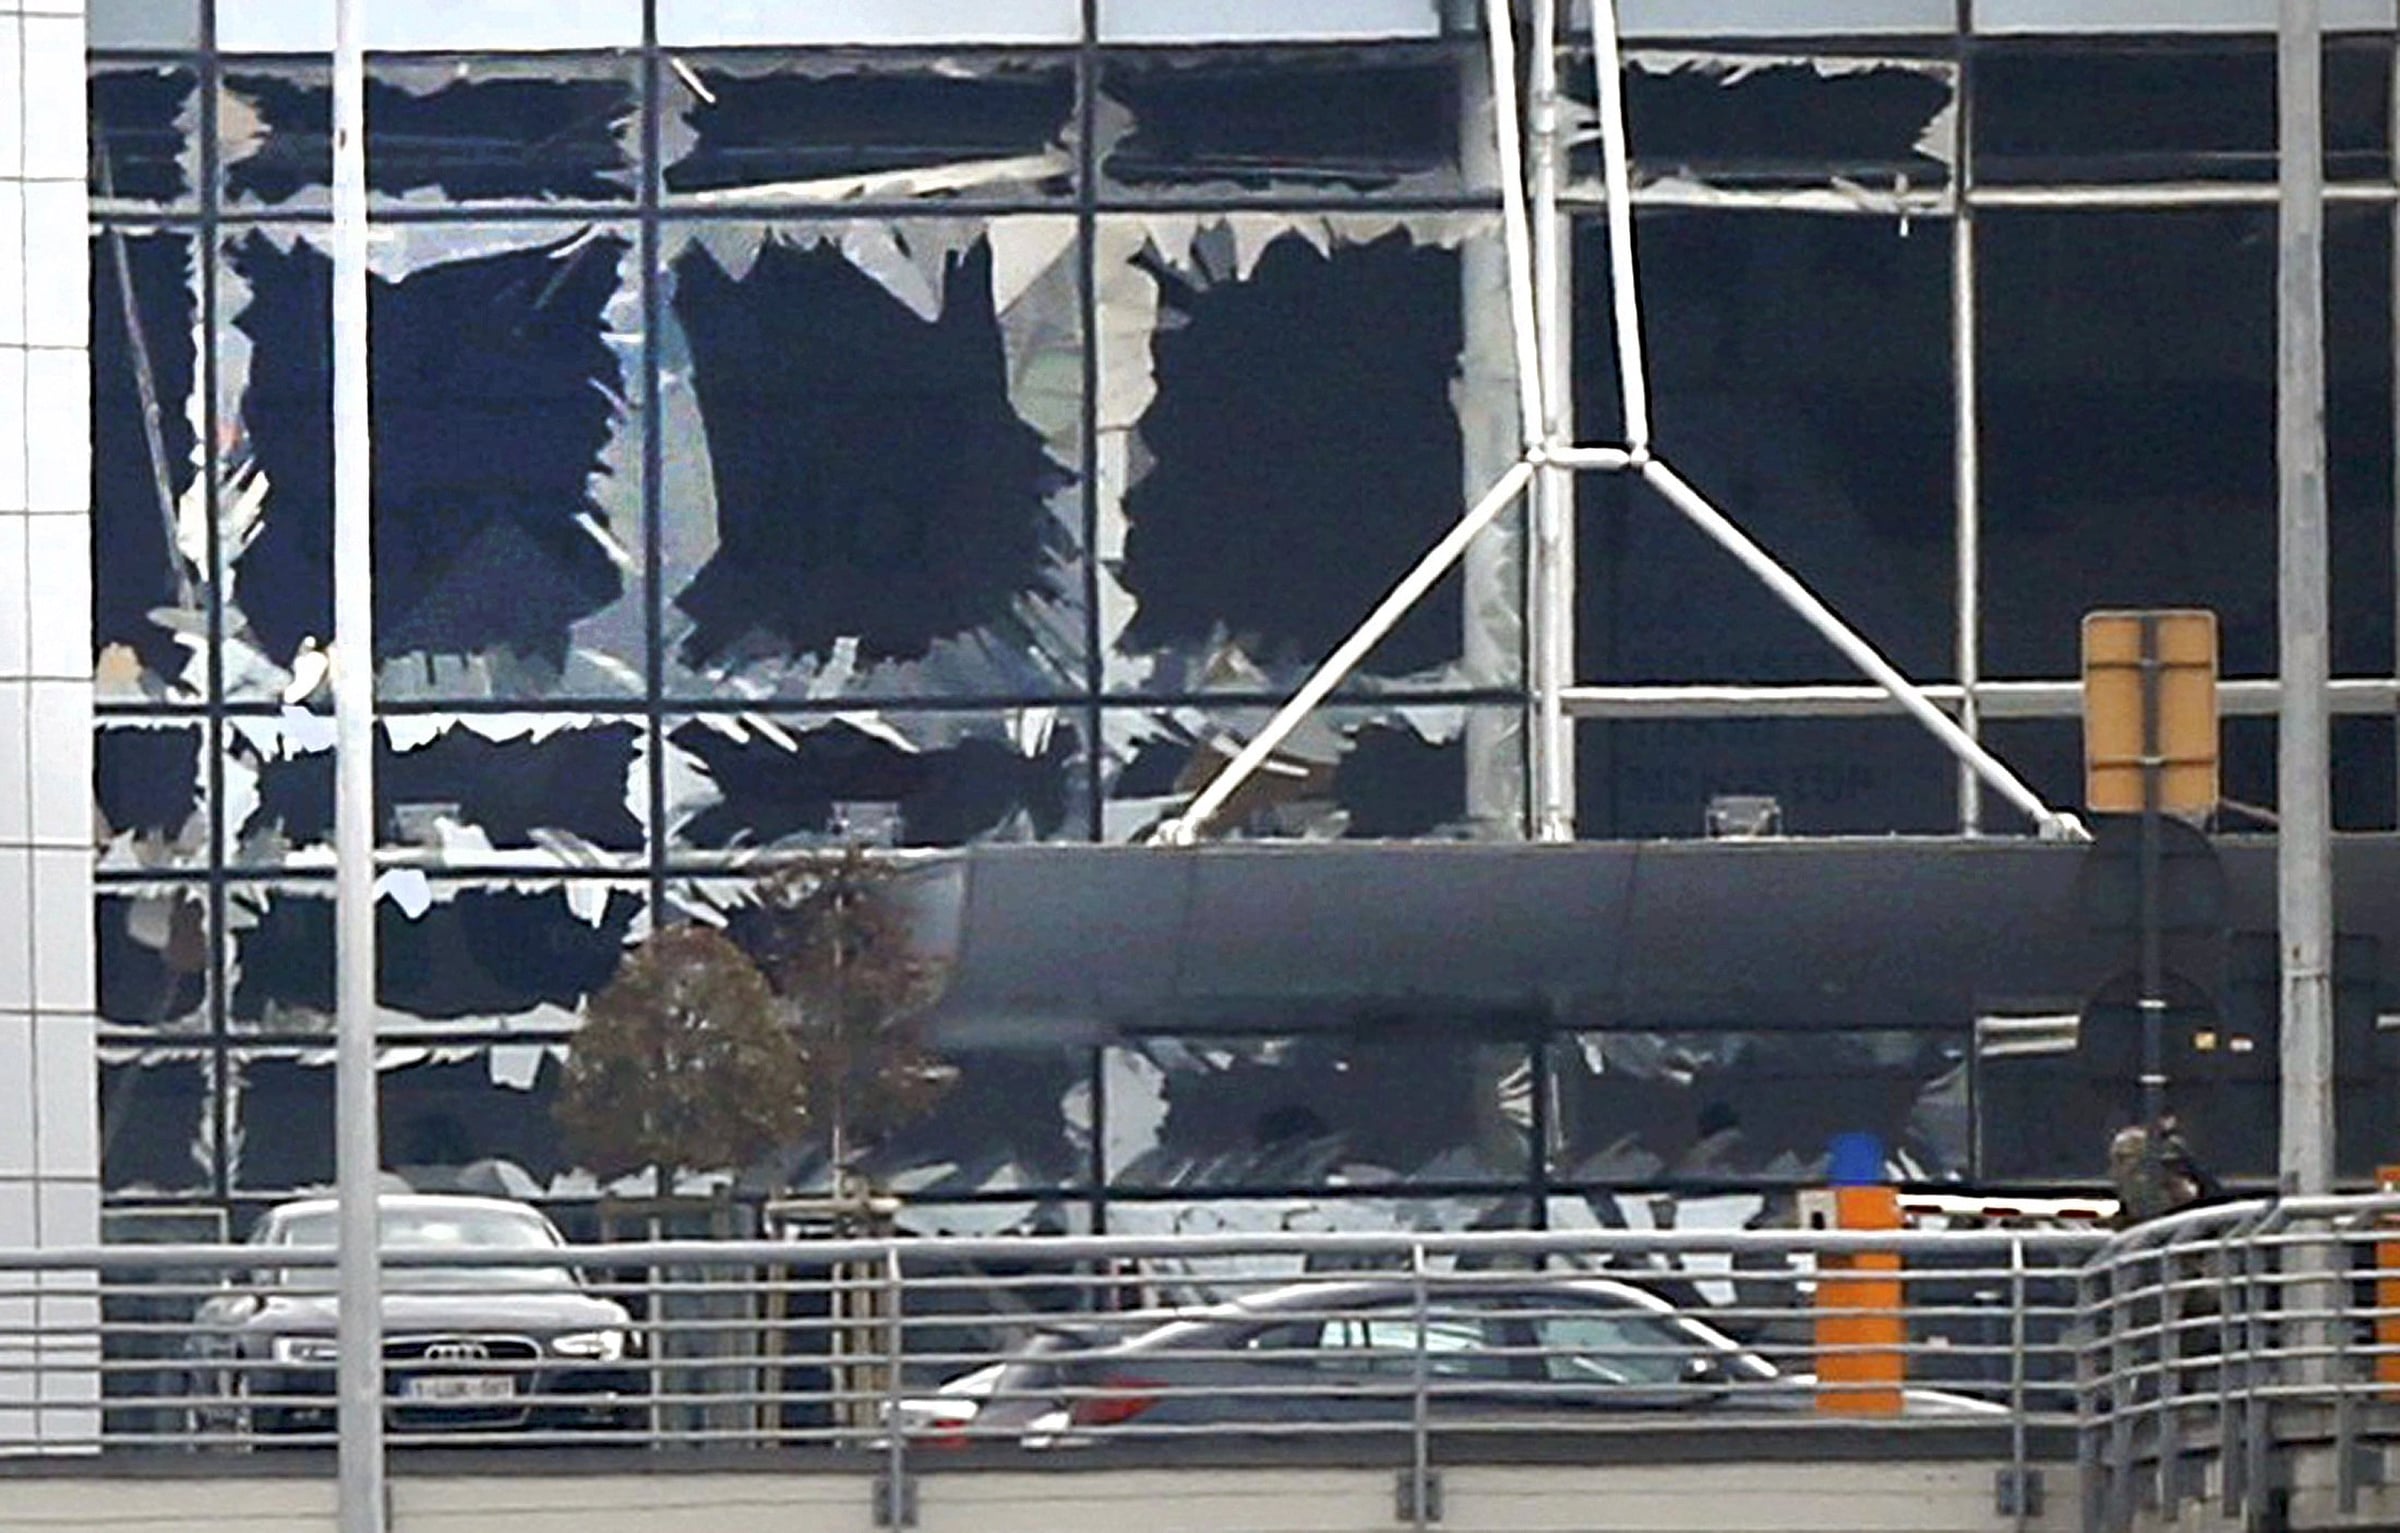 Broken windows are seen at the scene of explosions at Zaventem airport near Brussels. Photo: CNS/Francois Lenoir, Reuters